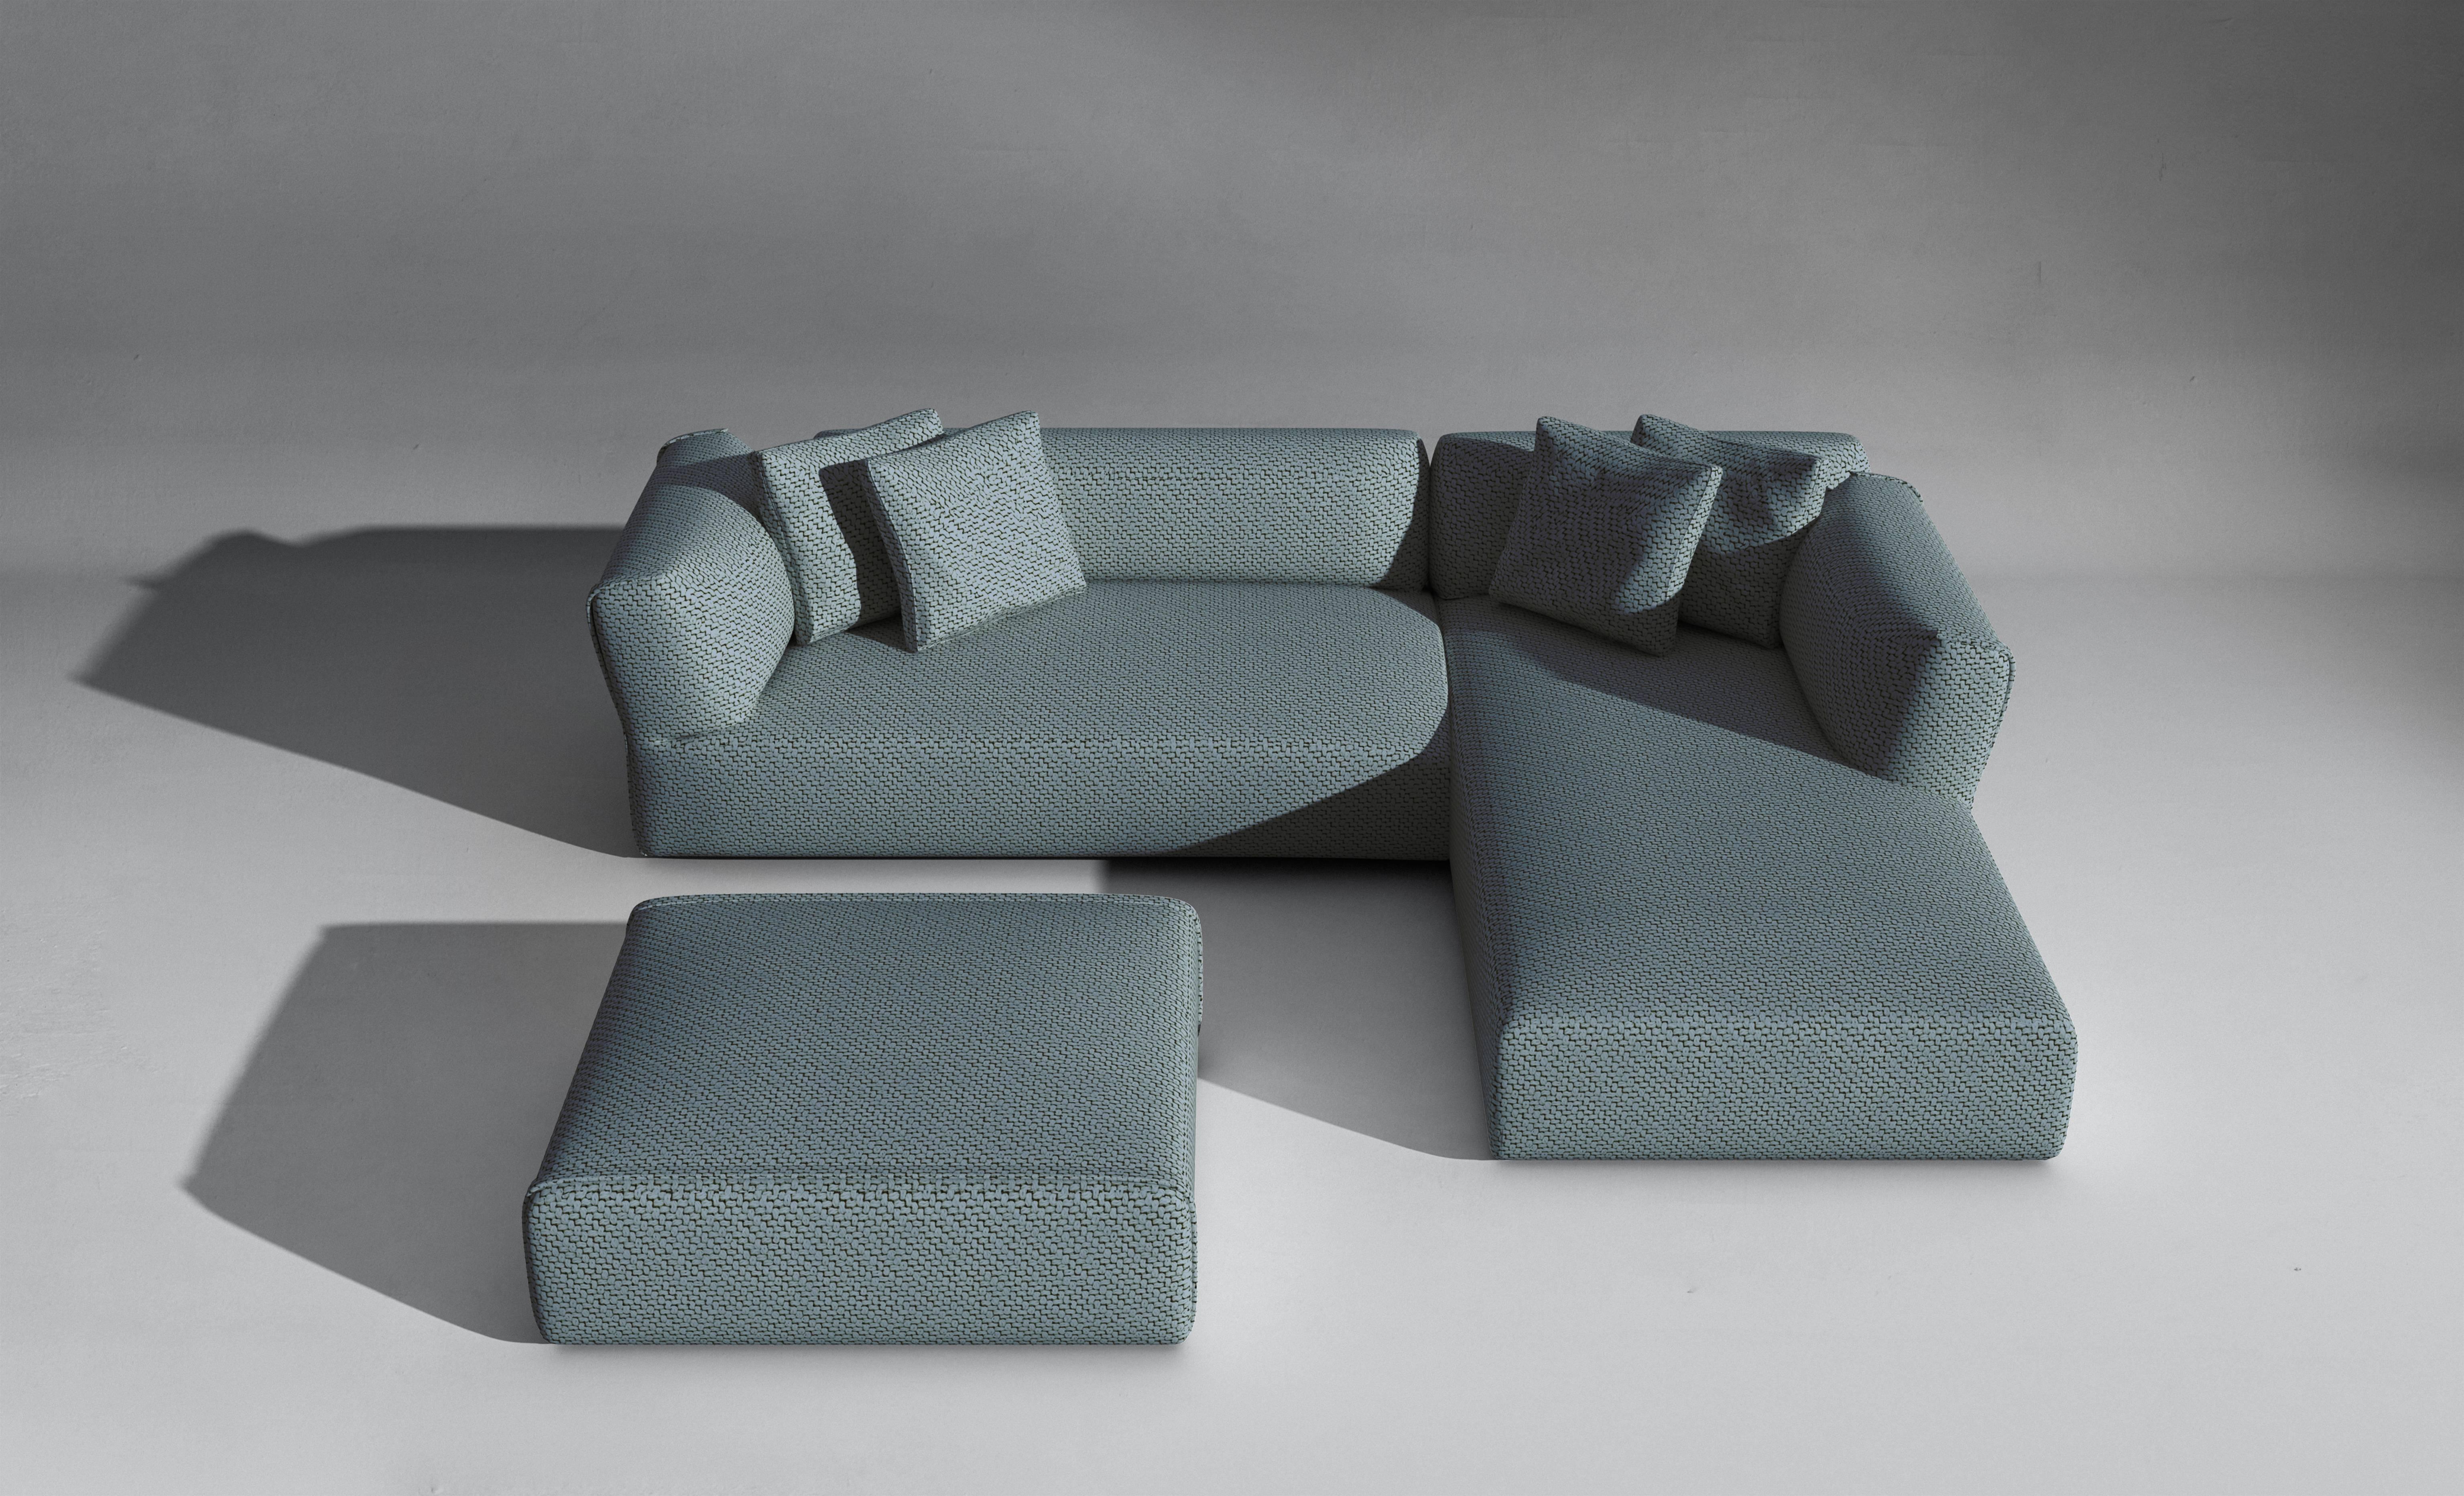 Rever is the product of the Driade collection designed for young people by Ludovica +Roberto Palomba. The sofa is made in a wooden frame with elastic belting and padding in polyurethane foams with different densities with a removable cover in fabric